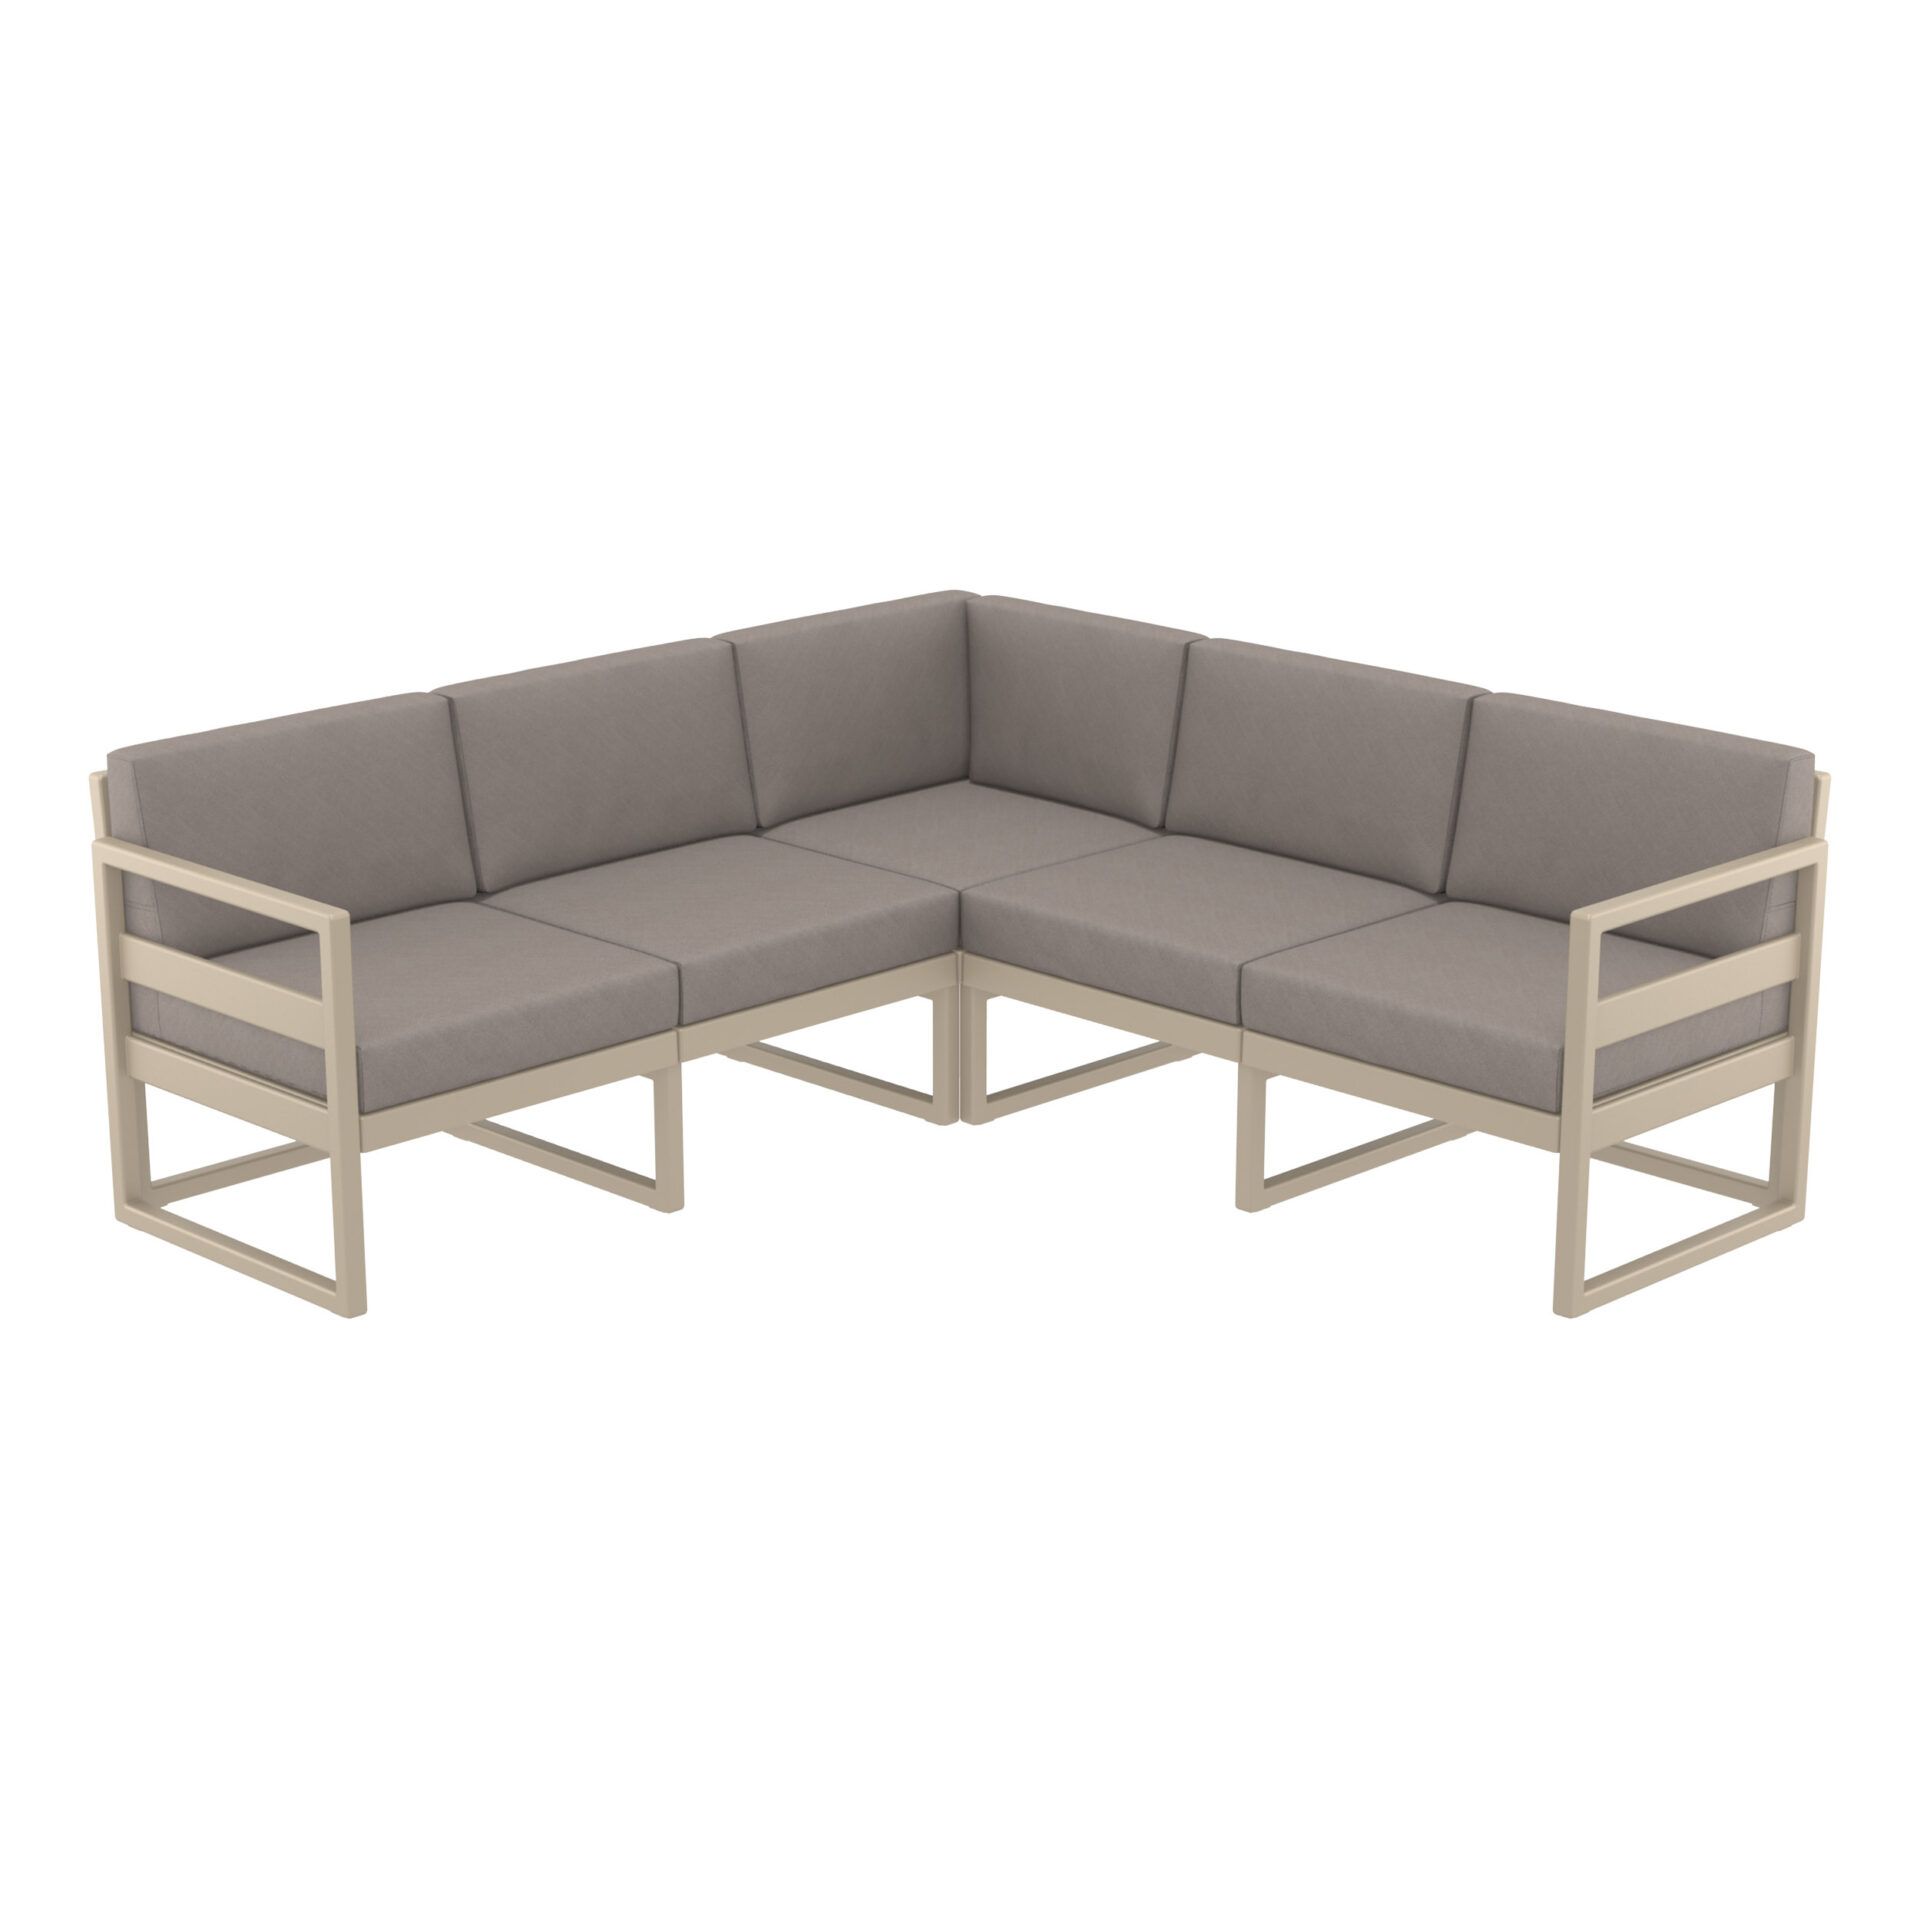 Mykonos Lounge Corner - Taupe with Brown Cushions